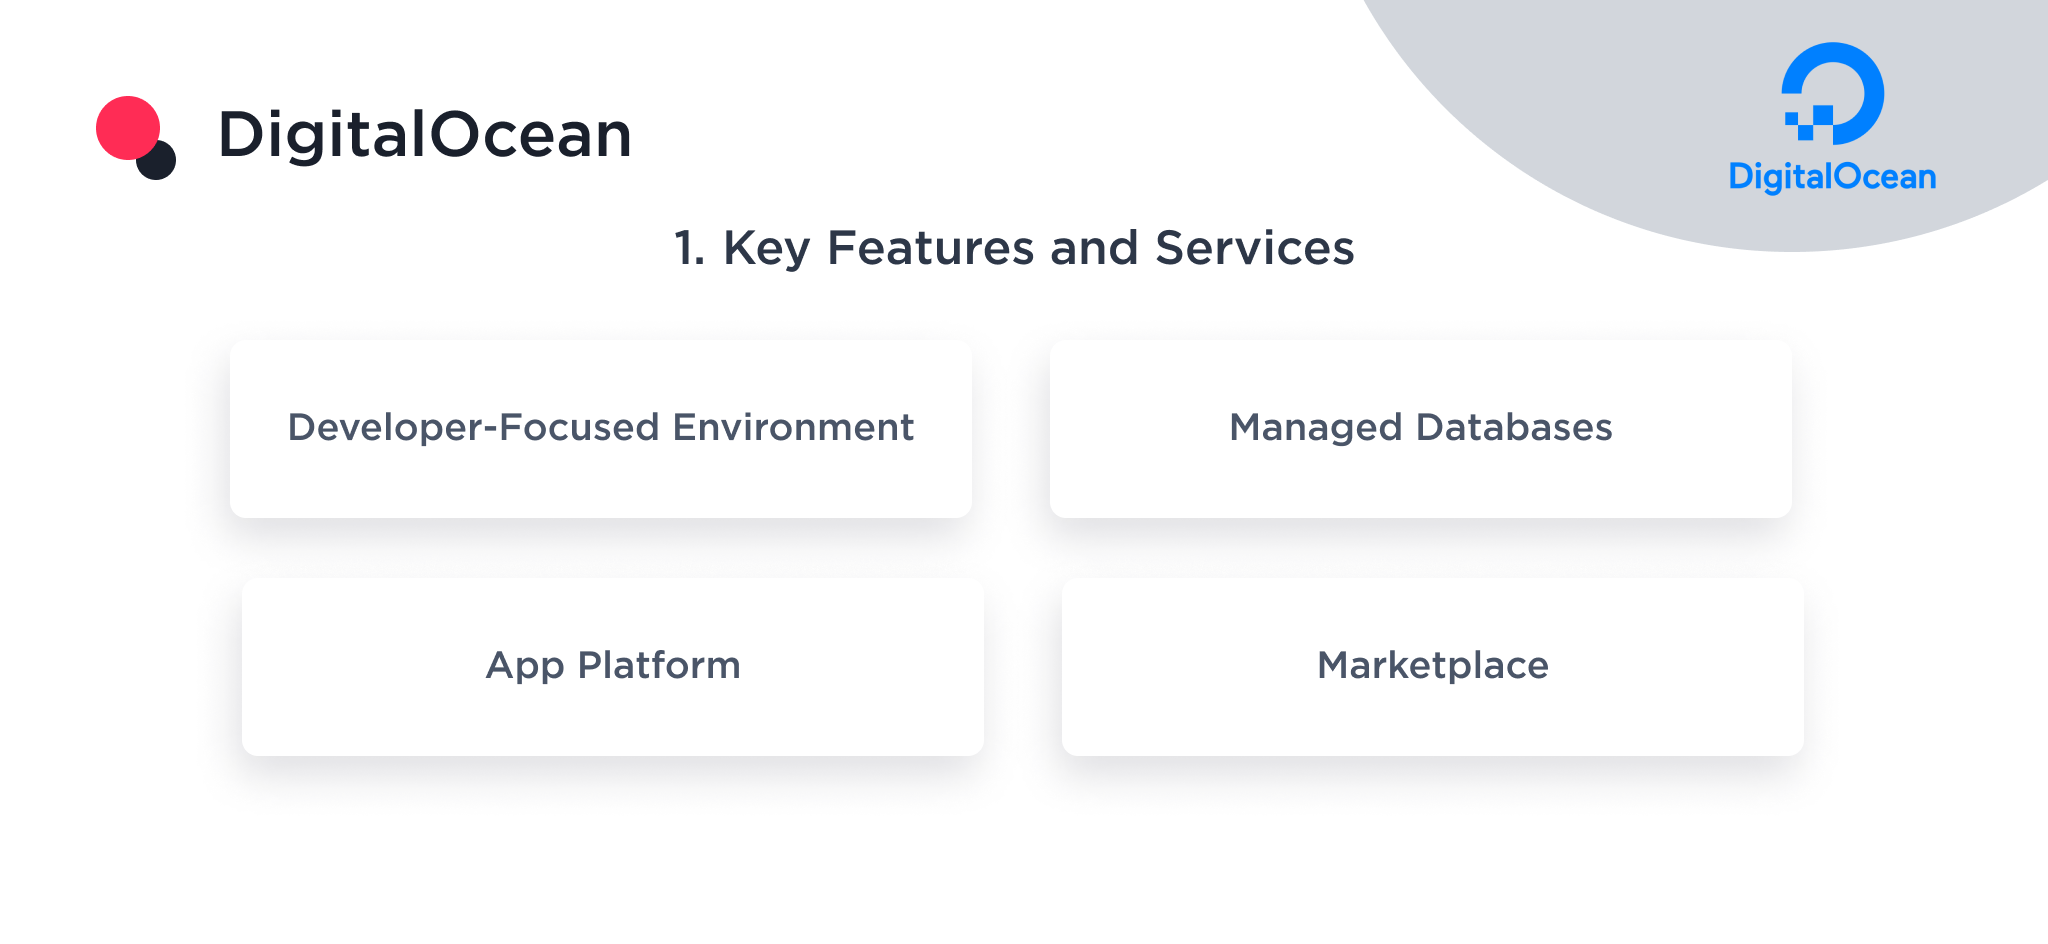 The main features and services provided by DigitalOcean